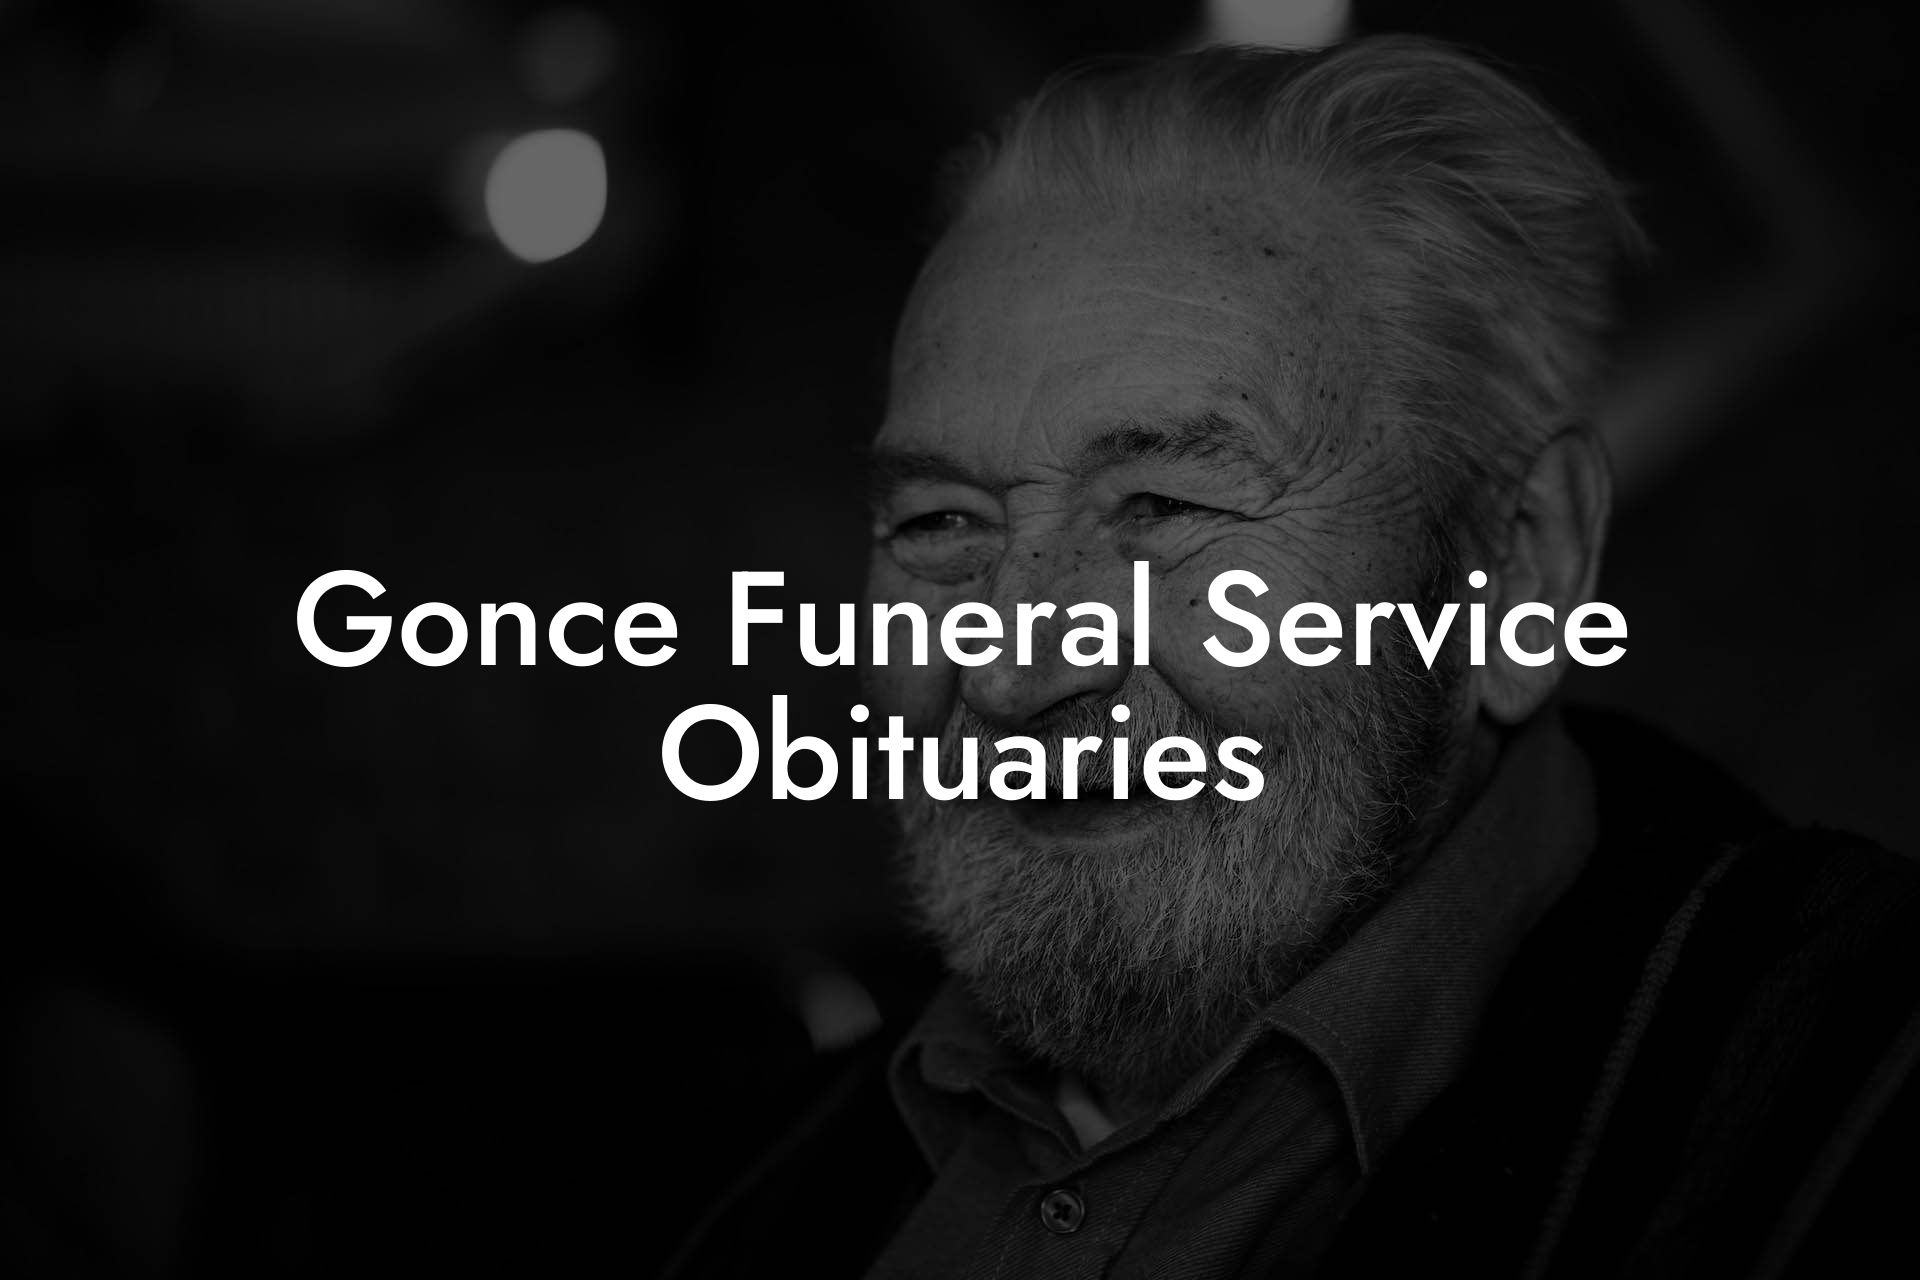 Gonce Funeral Service Obituaries